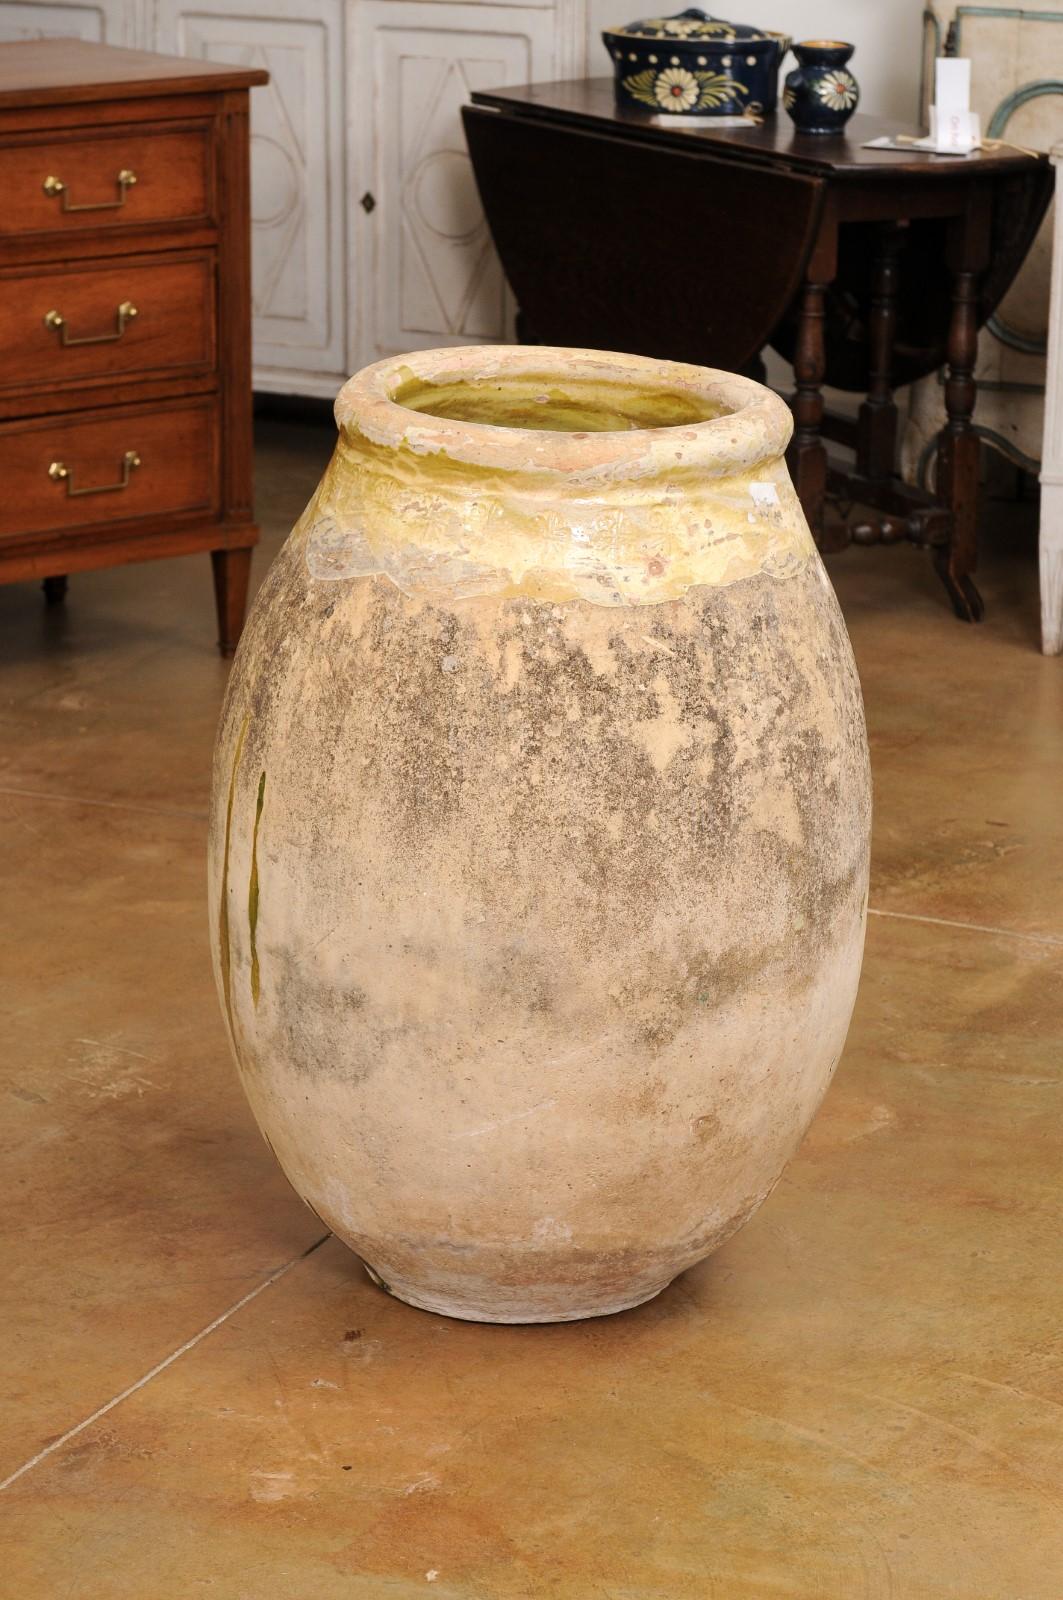 French 19th Century Terracotta Biot Jar with Yellow Glaze and Rustic Character For Sale 6